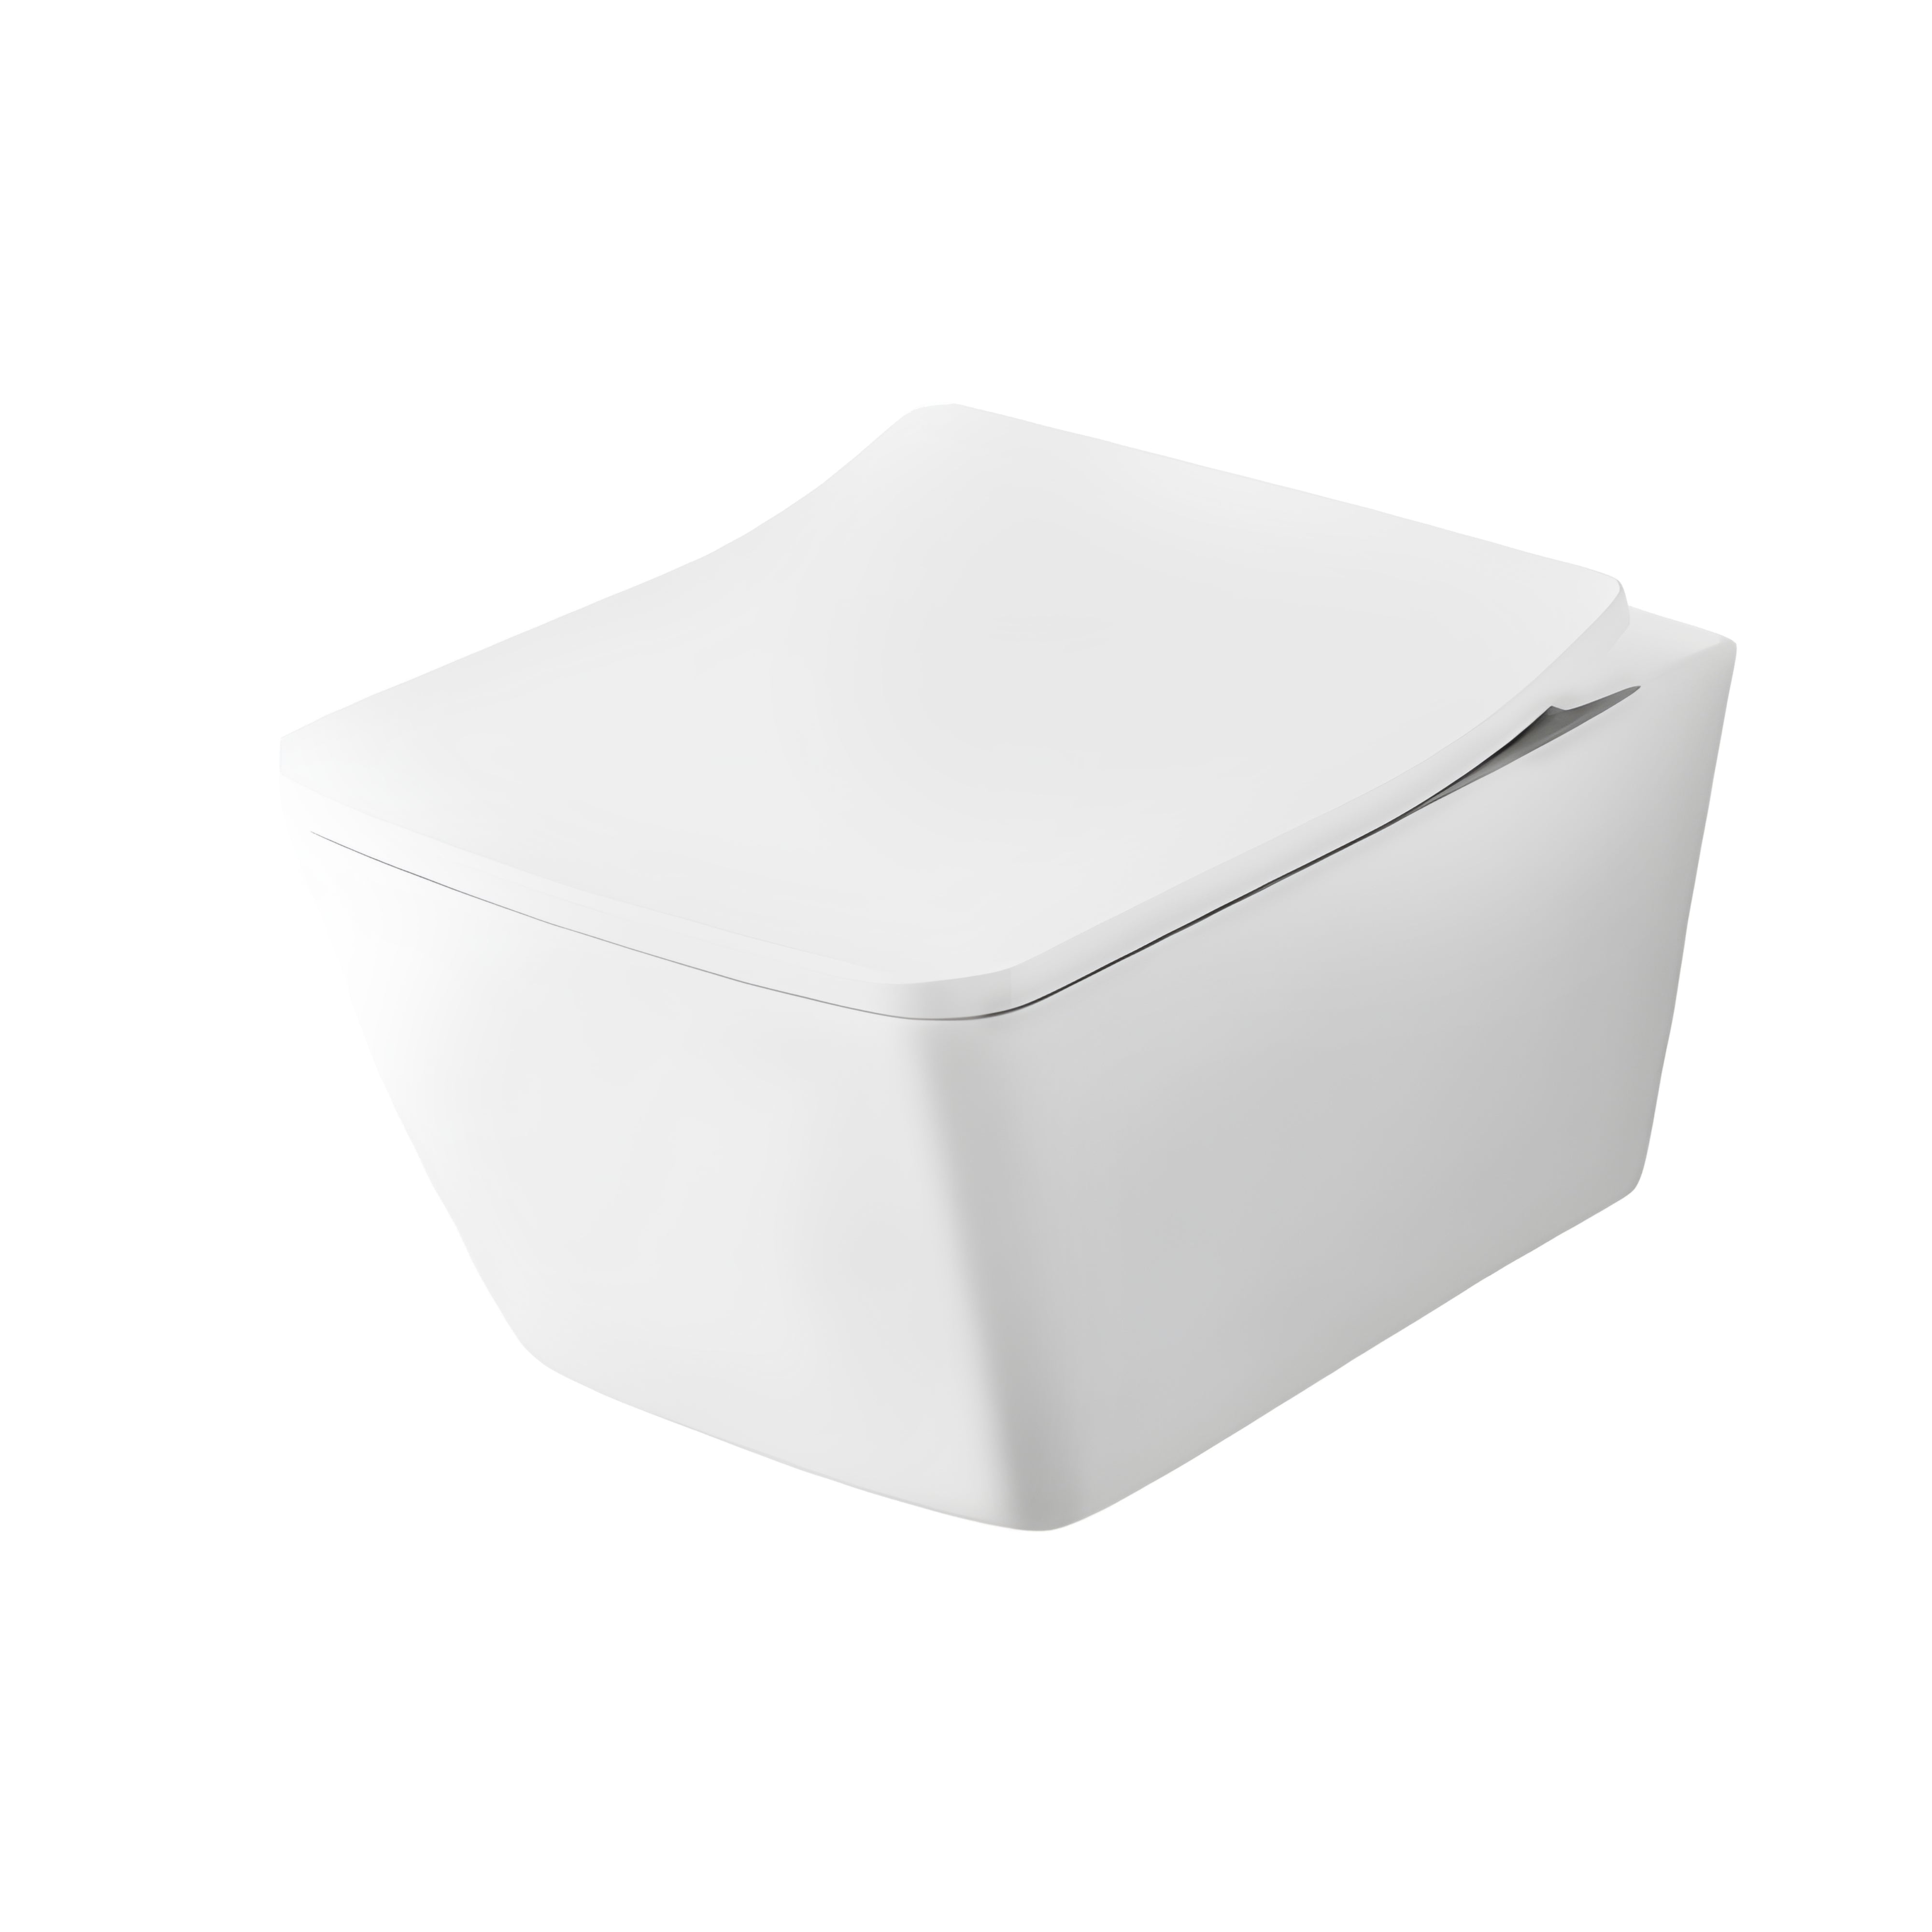 TOTO CONTEMPORARY II WALL HUNG TOILET (SQUARE SHAPE) GLOSS WHITE